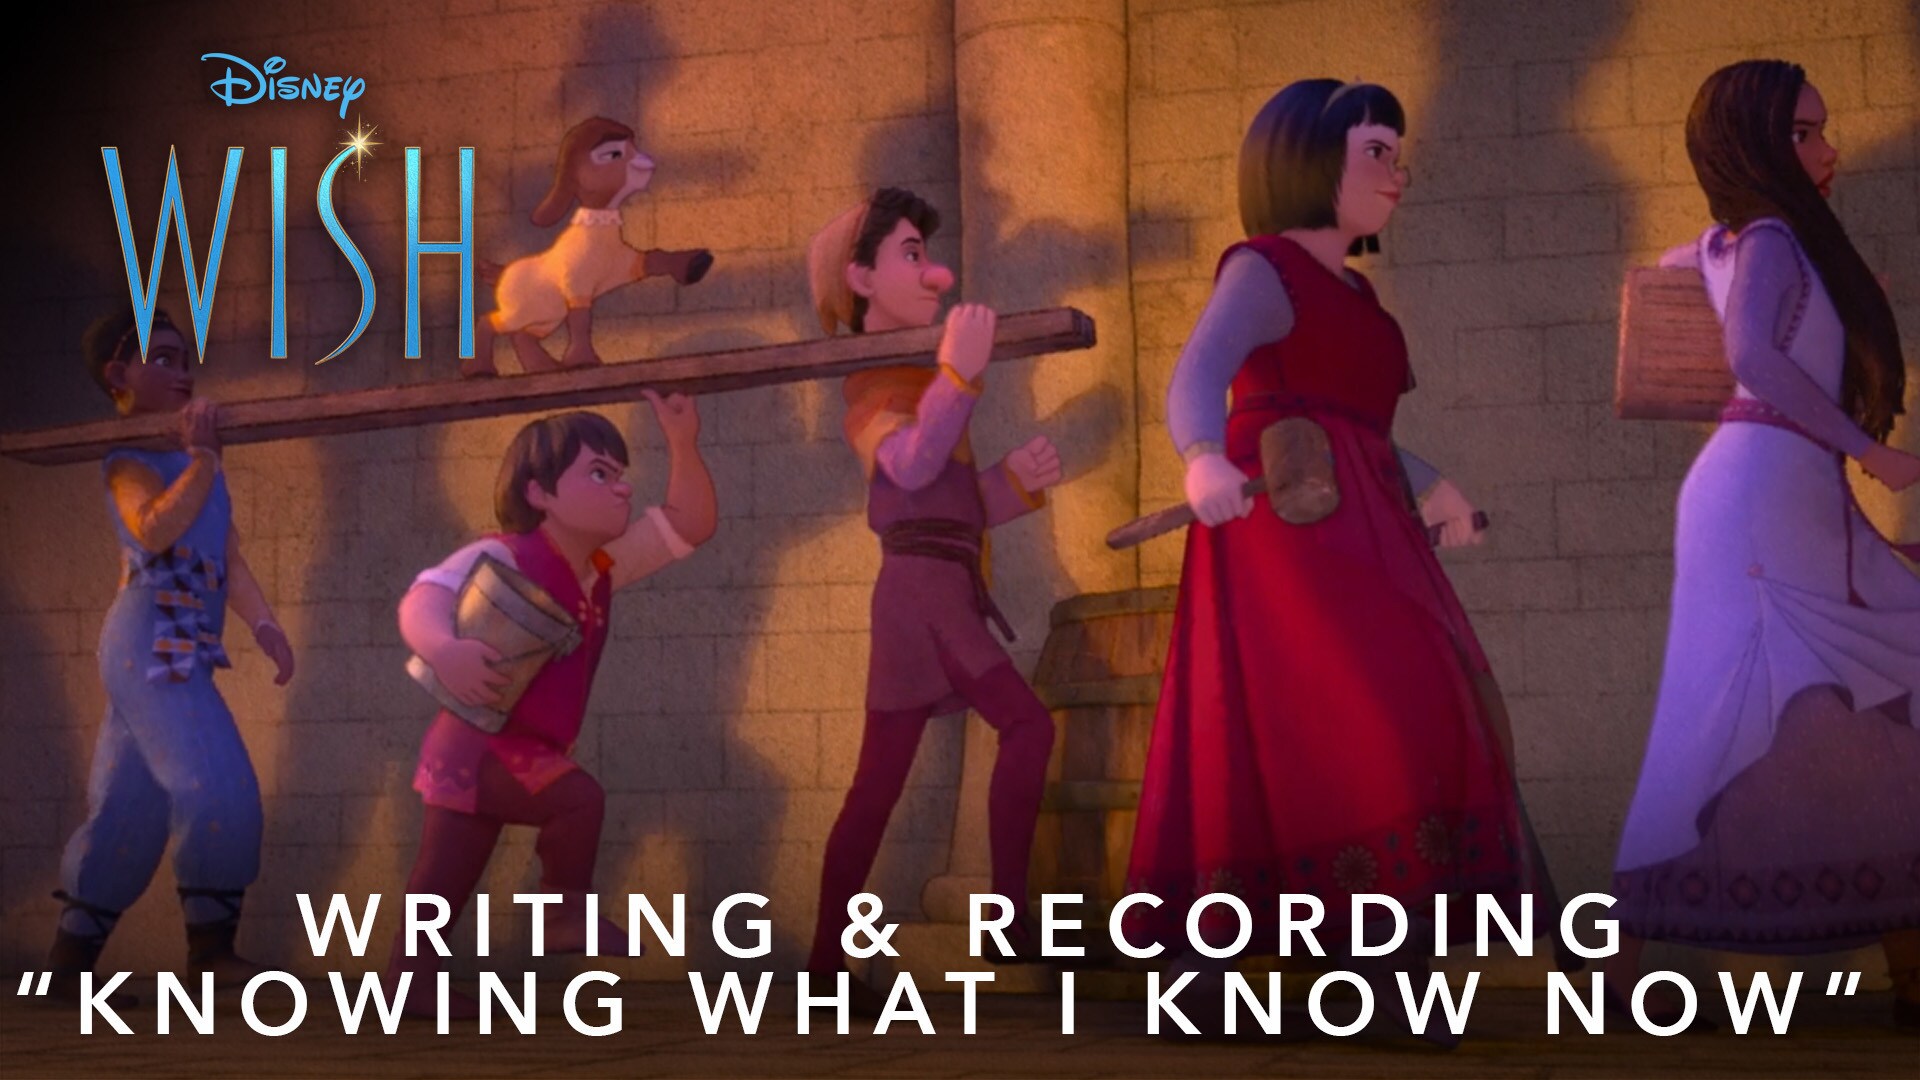 Disney's Wish | Writing & Recording "Knowing What I Know Now"